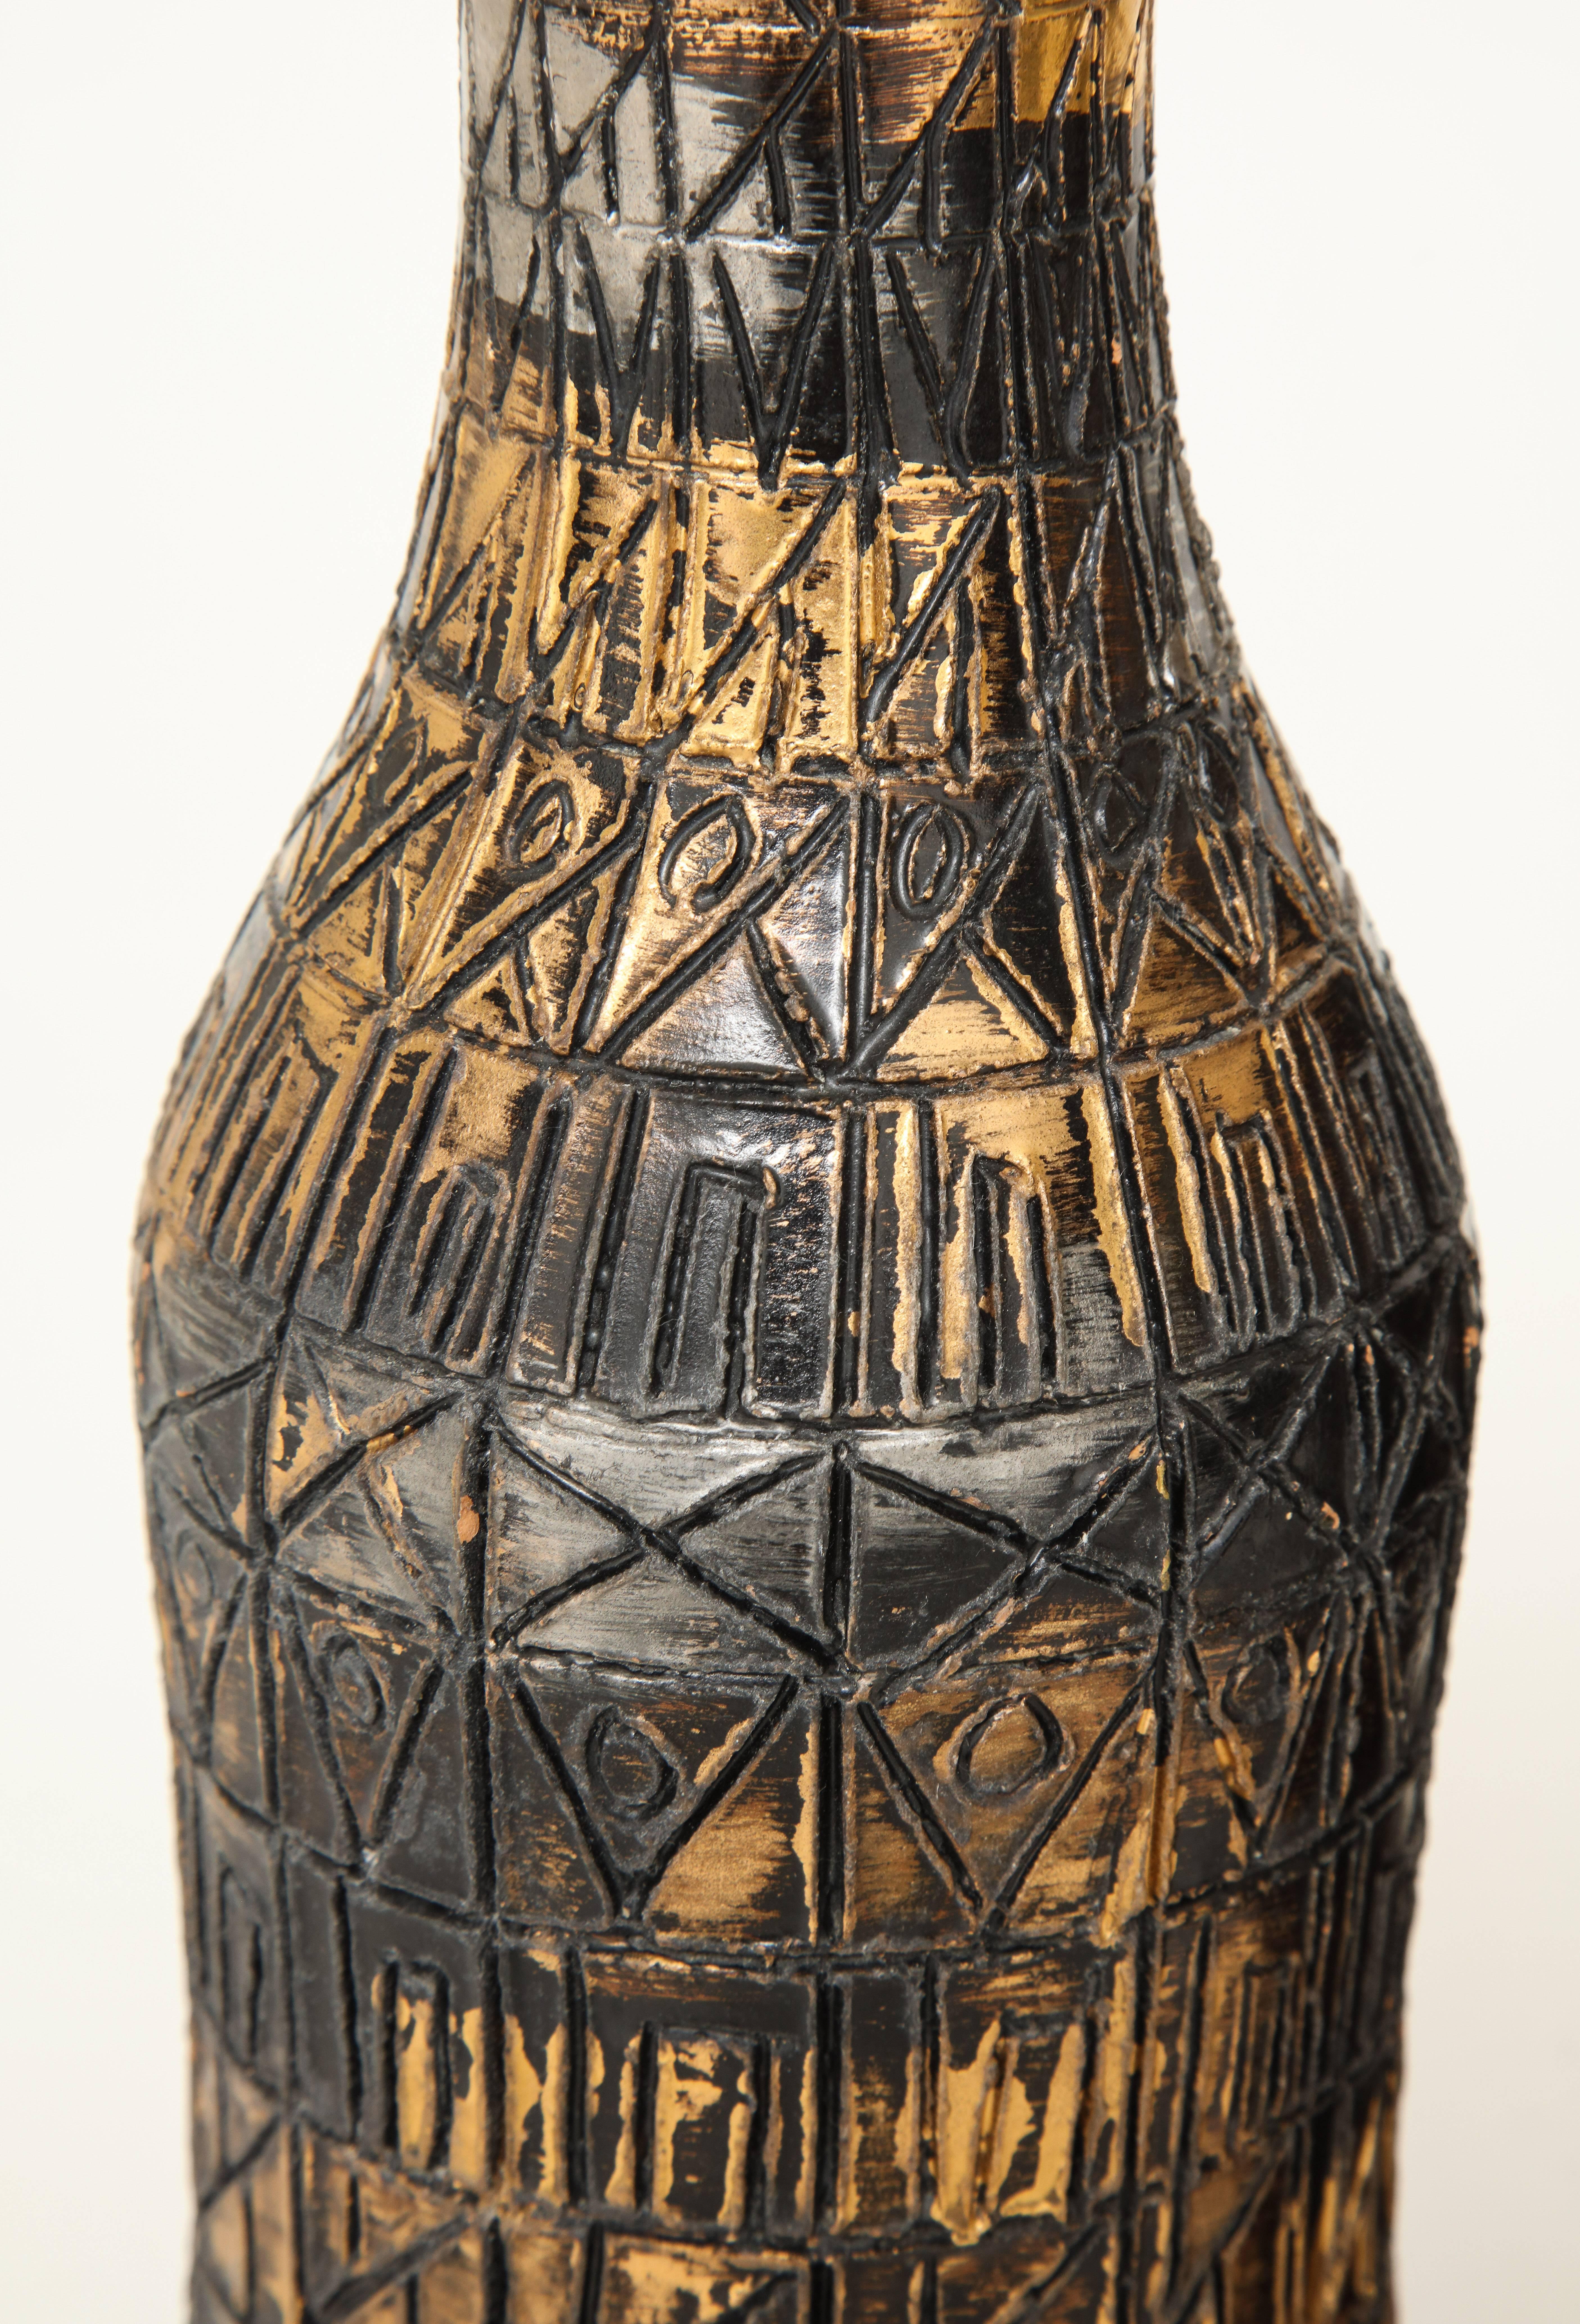 Raymor Vases, Ceramic, Sgraffito, Gold, Silver, Bronze, Signed In Good Condition For Sale In New York, NY